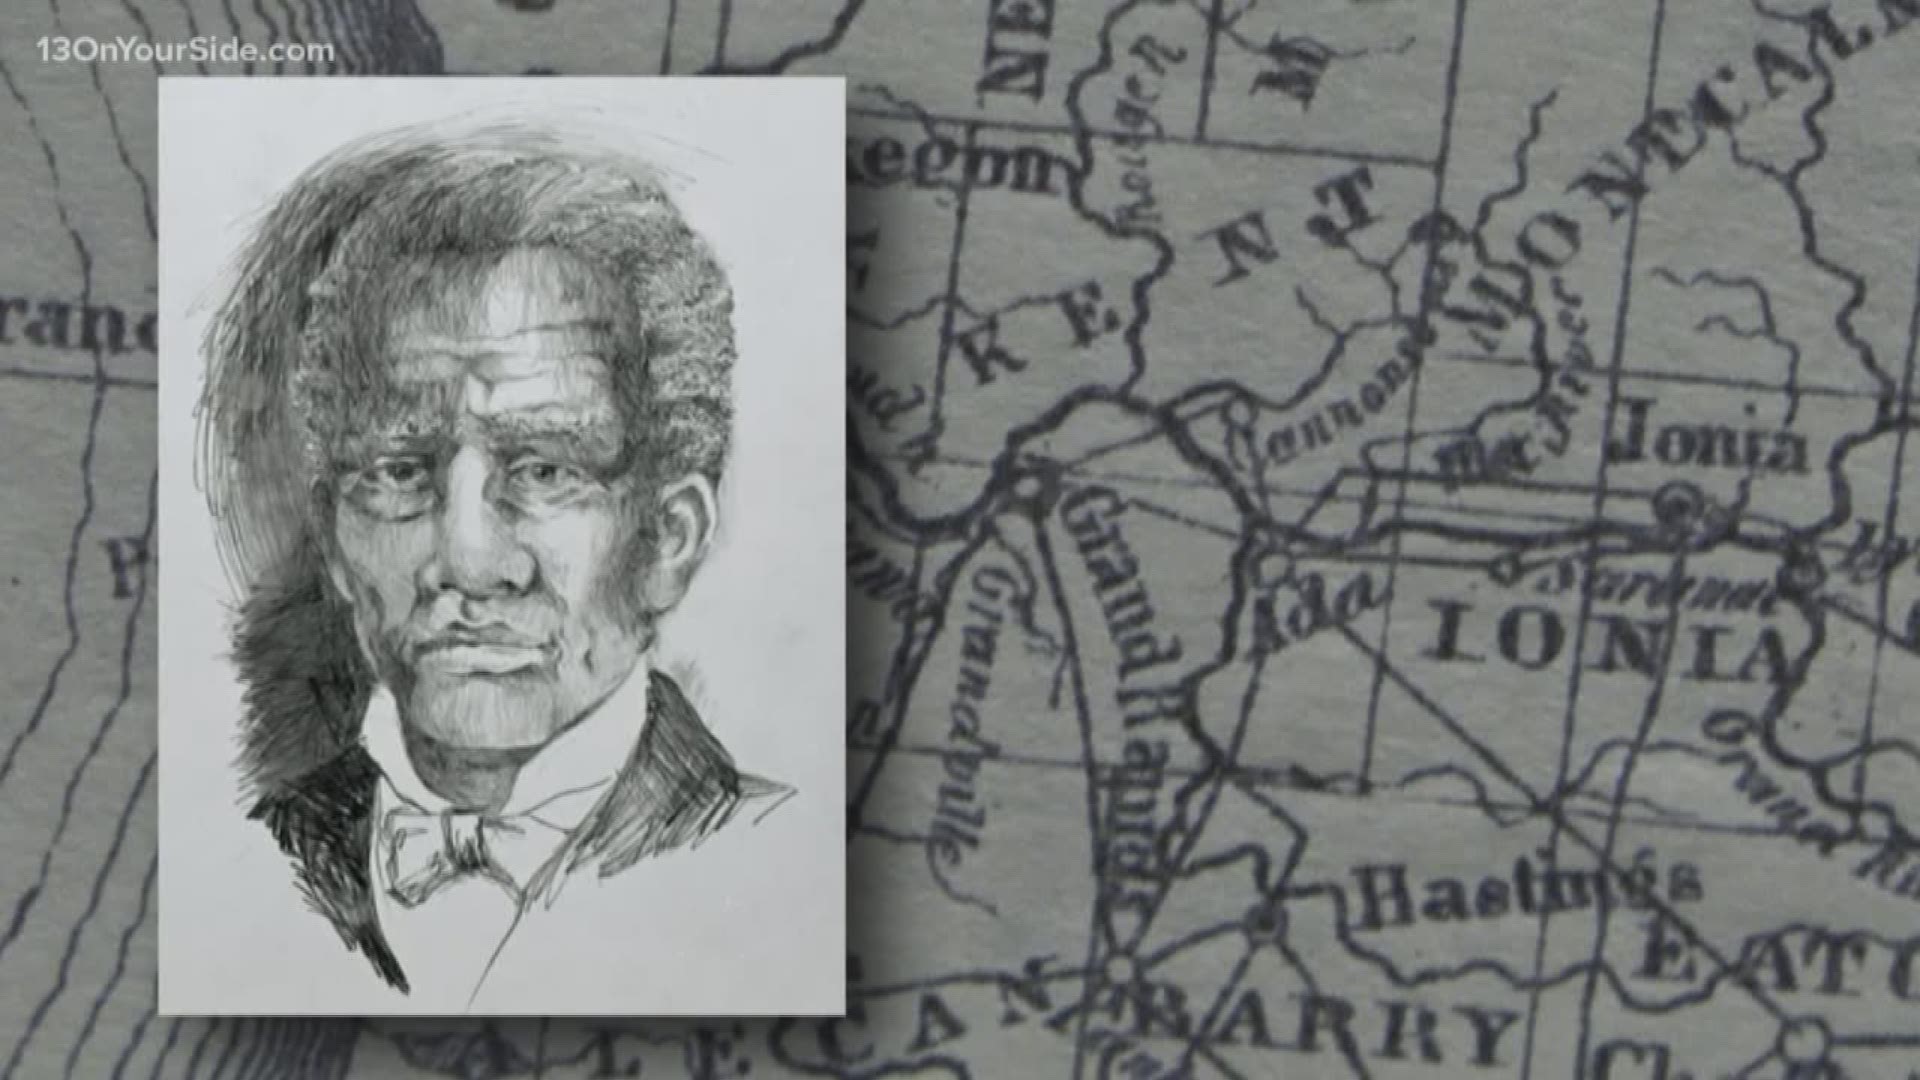 In the mid 1840s, William J. Hardy, a 23-year-old African American man, purchased 95 acres of farmland in Gaines Township, just a few miles southeast of Grand Rapids